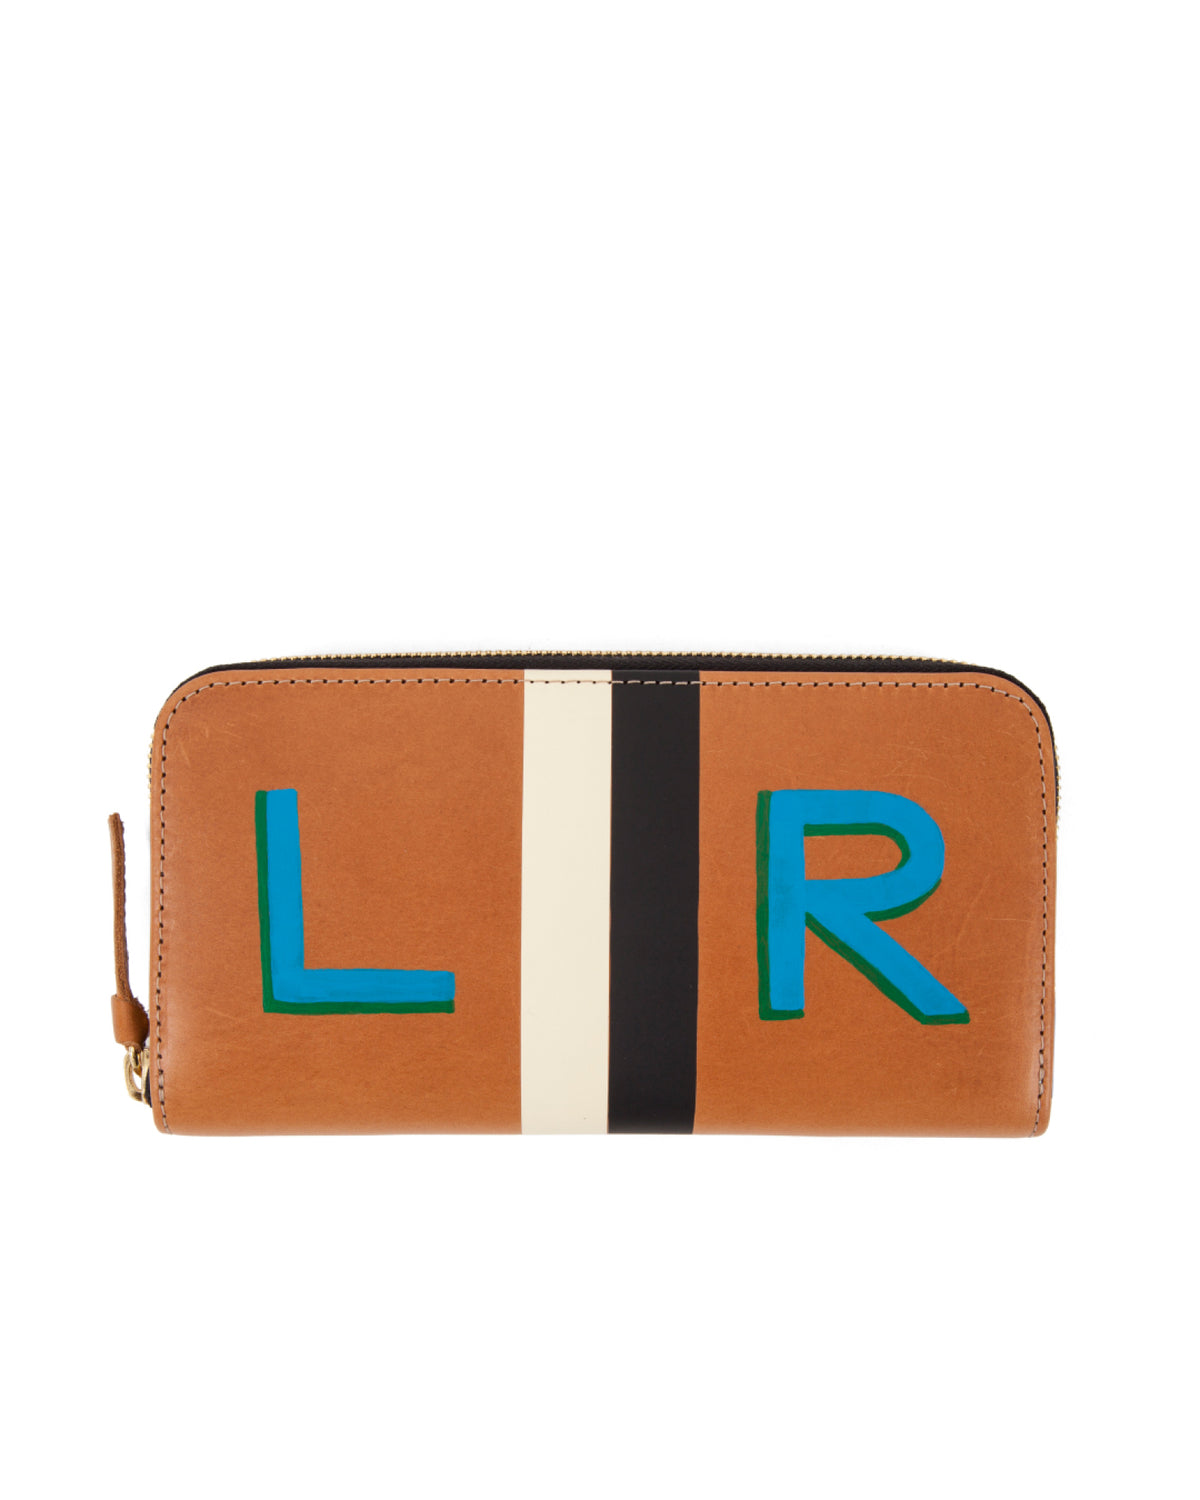 Cuoio with Black and Cream Stripes Zip Wallet with 2 Inch Hand Painted Letters On The Center